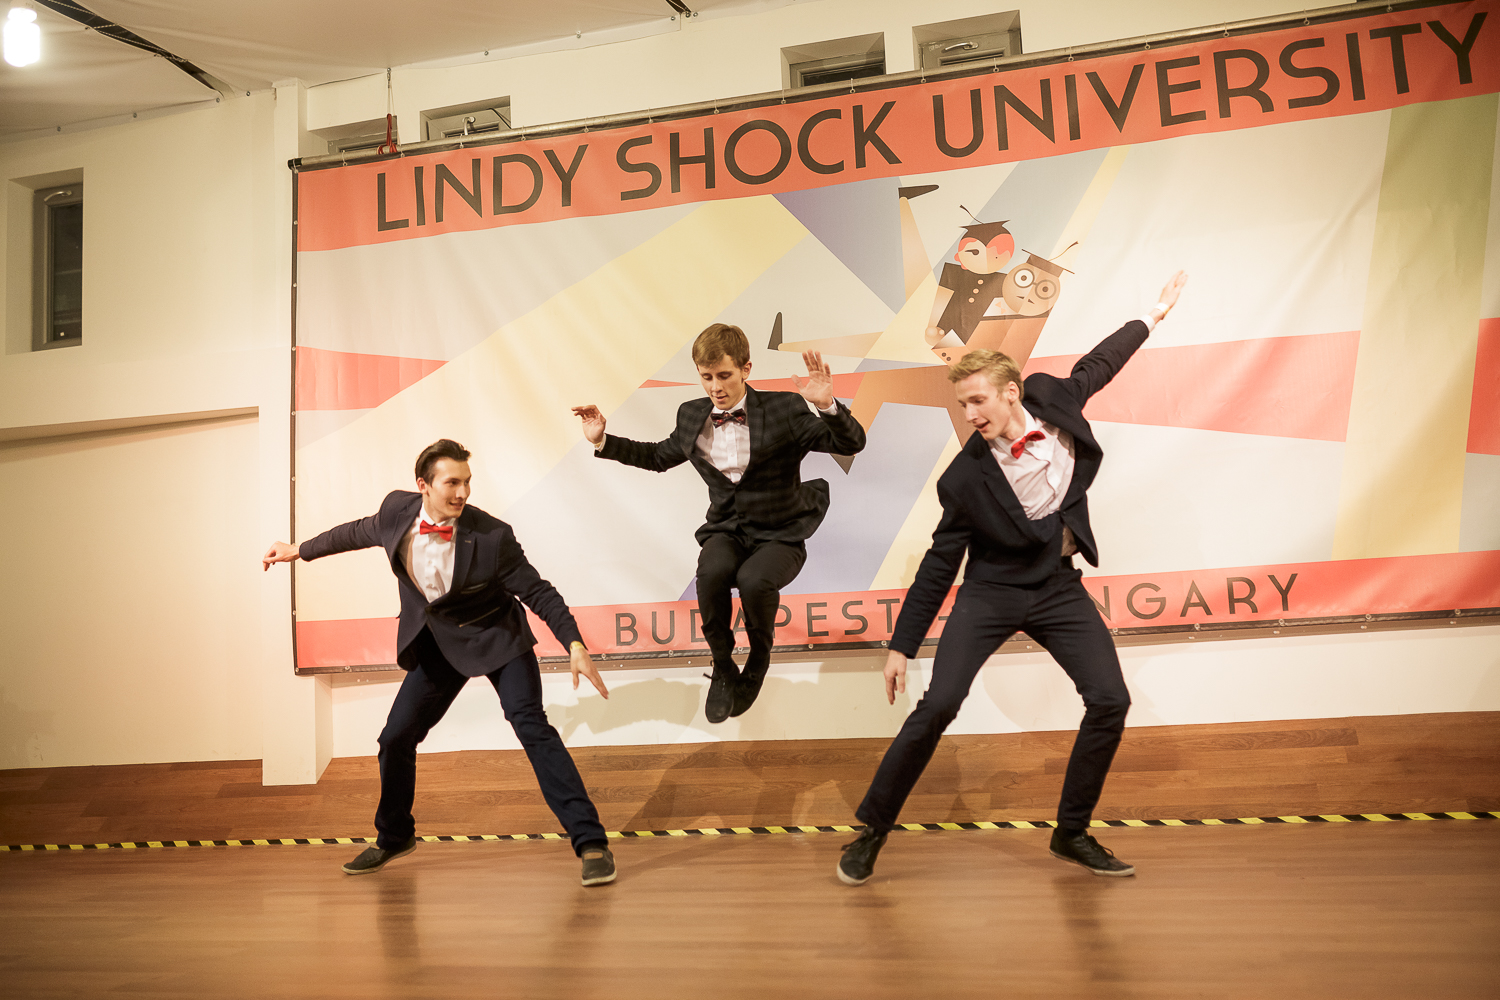  Lindy Shock 2015 - Photo Credit: For Dancers Only (http://d.pr/1fEEY) - http://www.ebobrie.com/lindy-shock-2015 